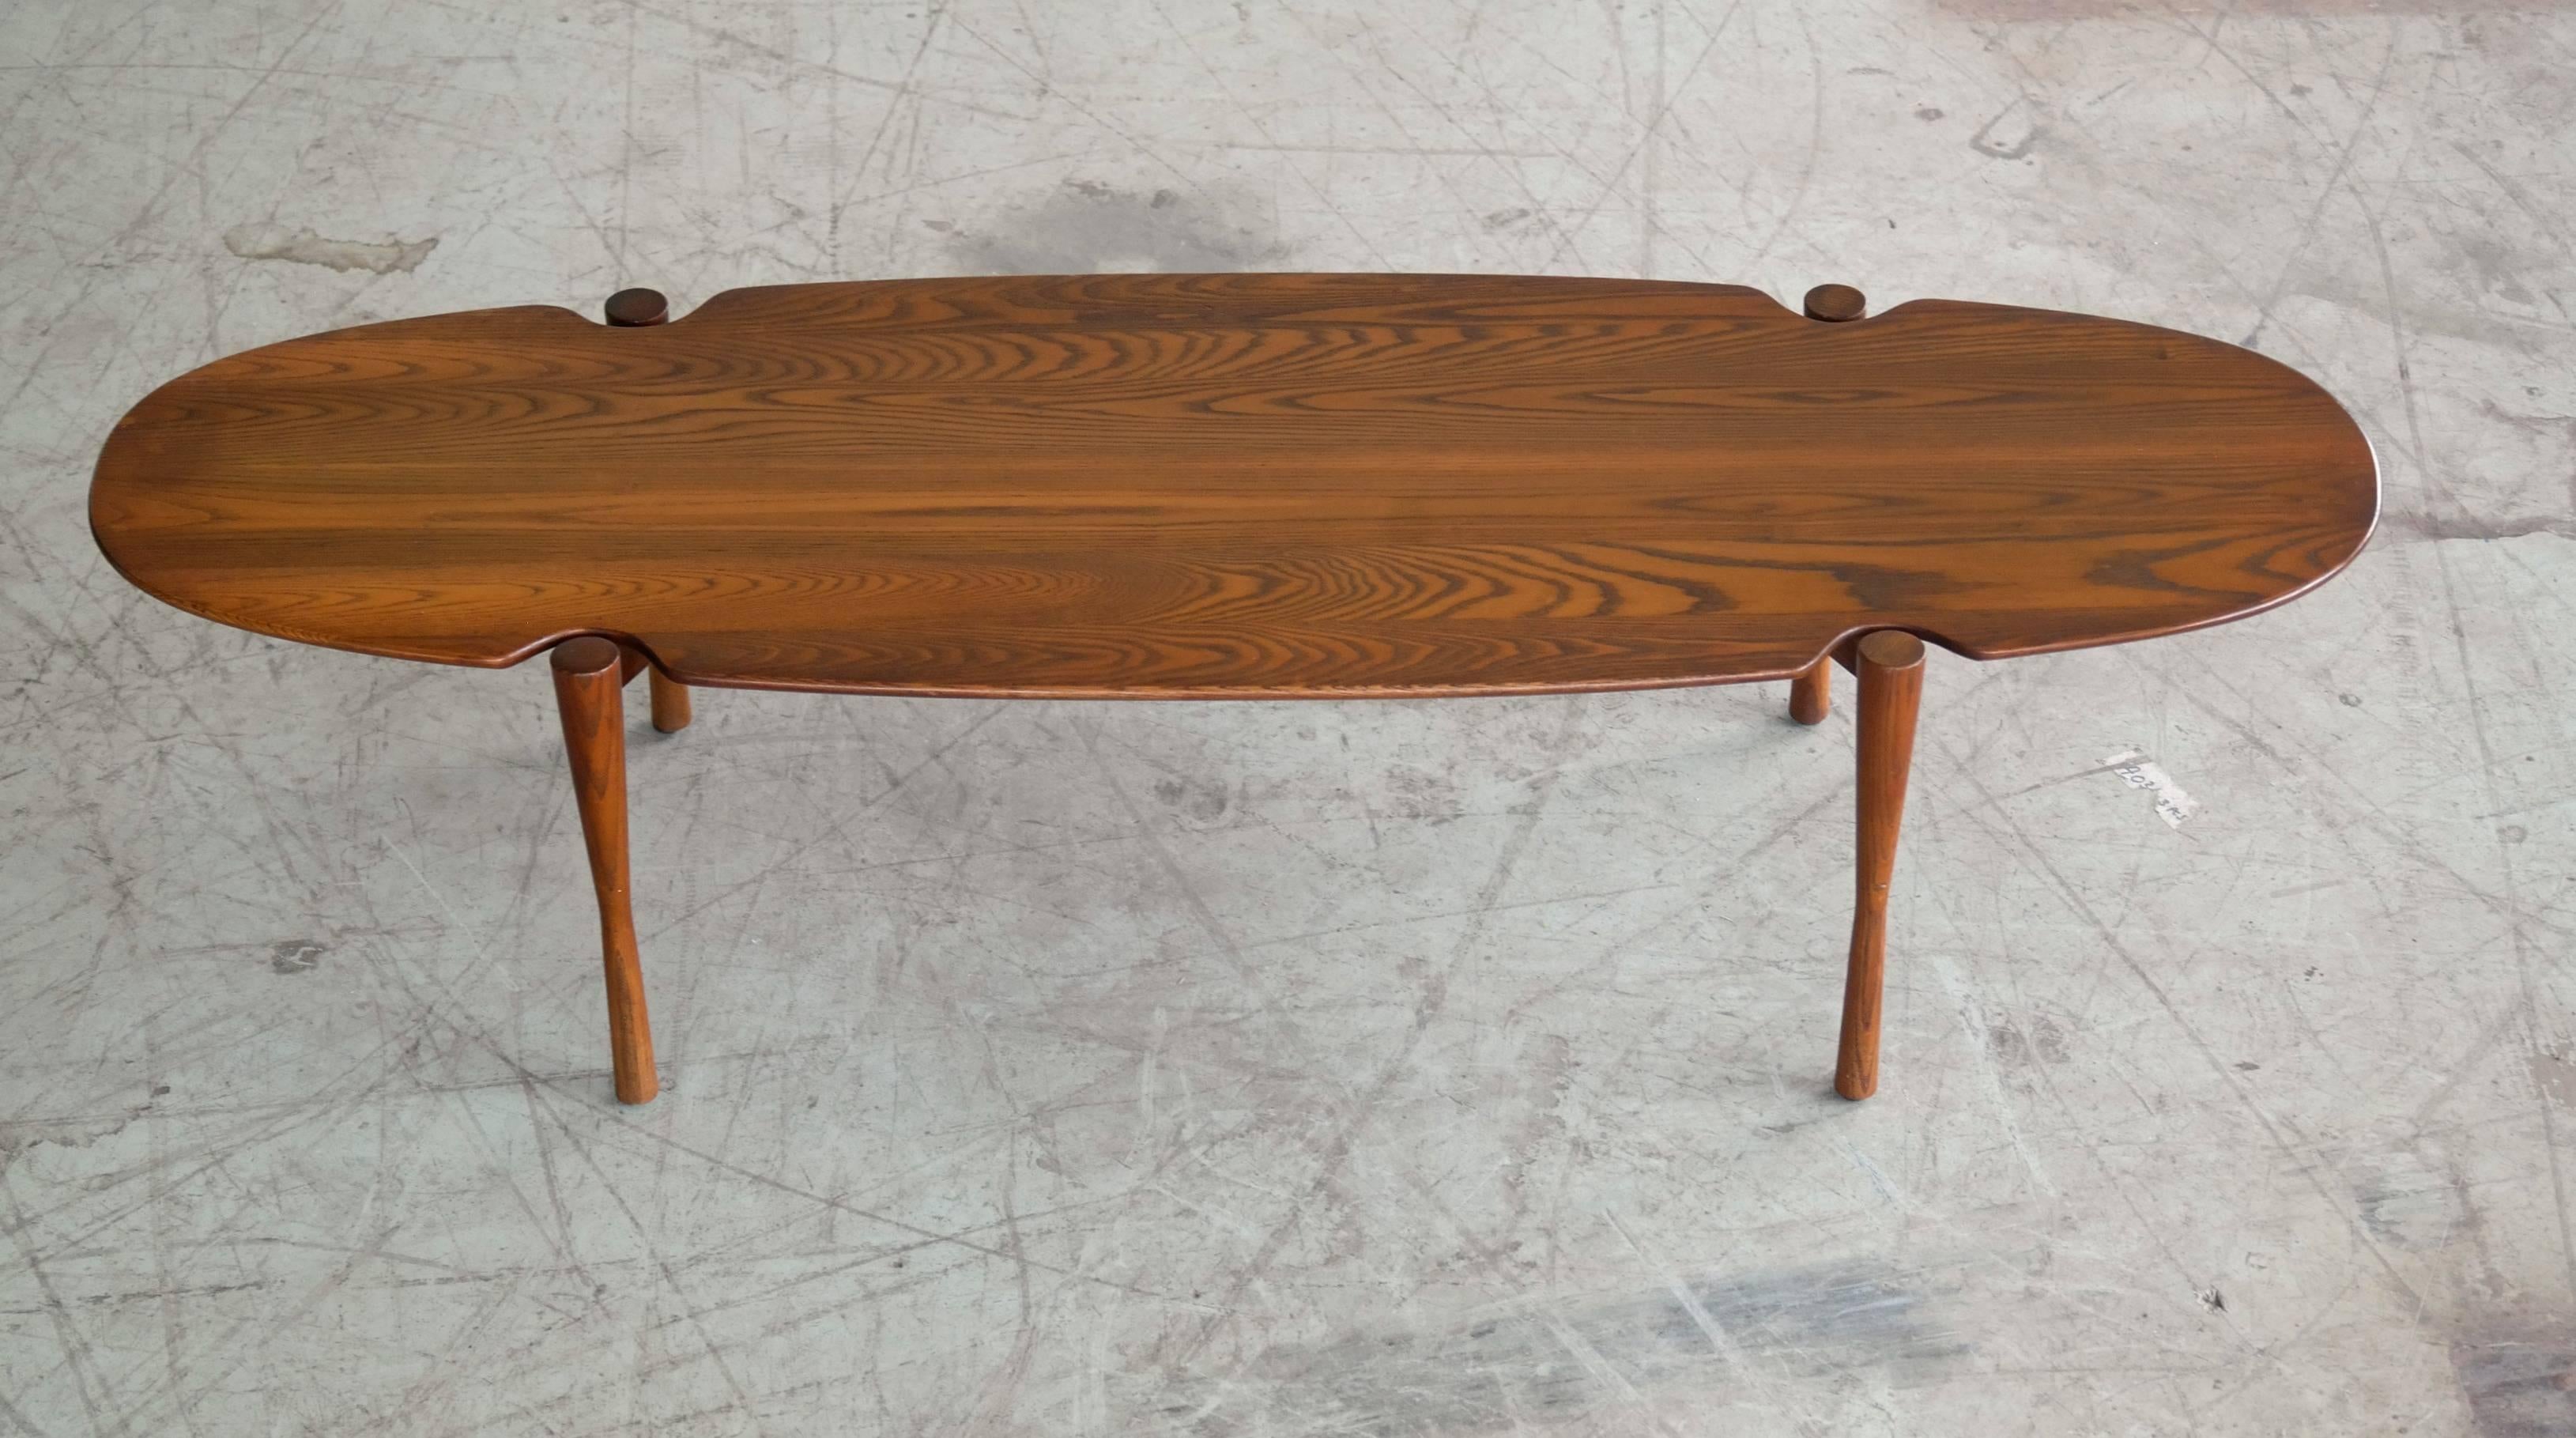 Gorgeous, 1960s surfboard design coffee or cocktail table. Nice sought after low design befitting of a modern living room. Made from exquisite solid walnut stained ash with great grain figure. Excellent near perfect condition.
 